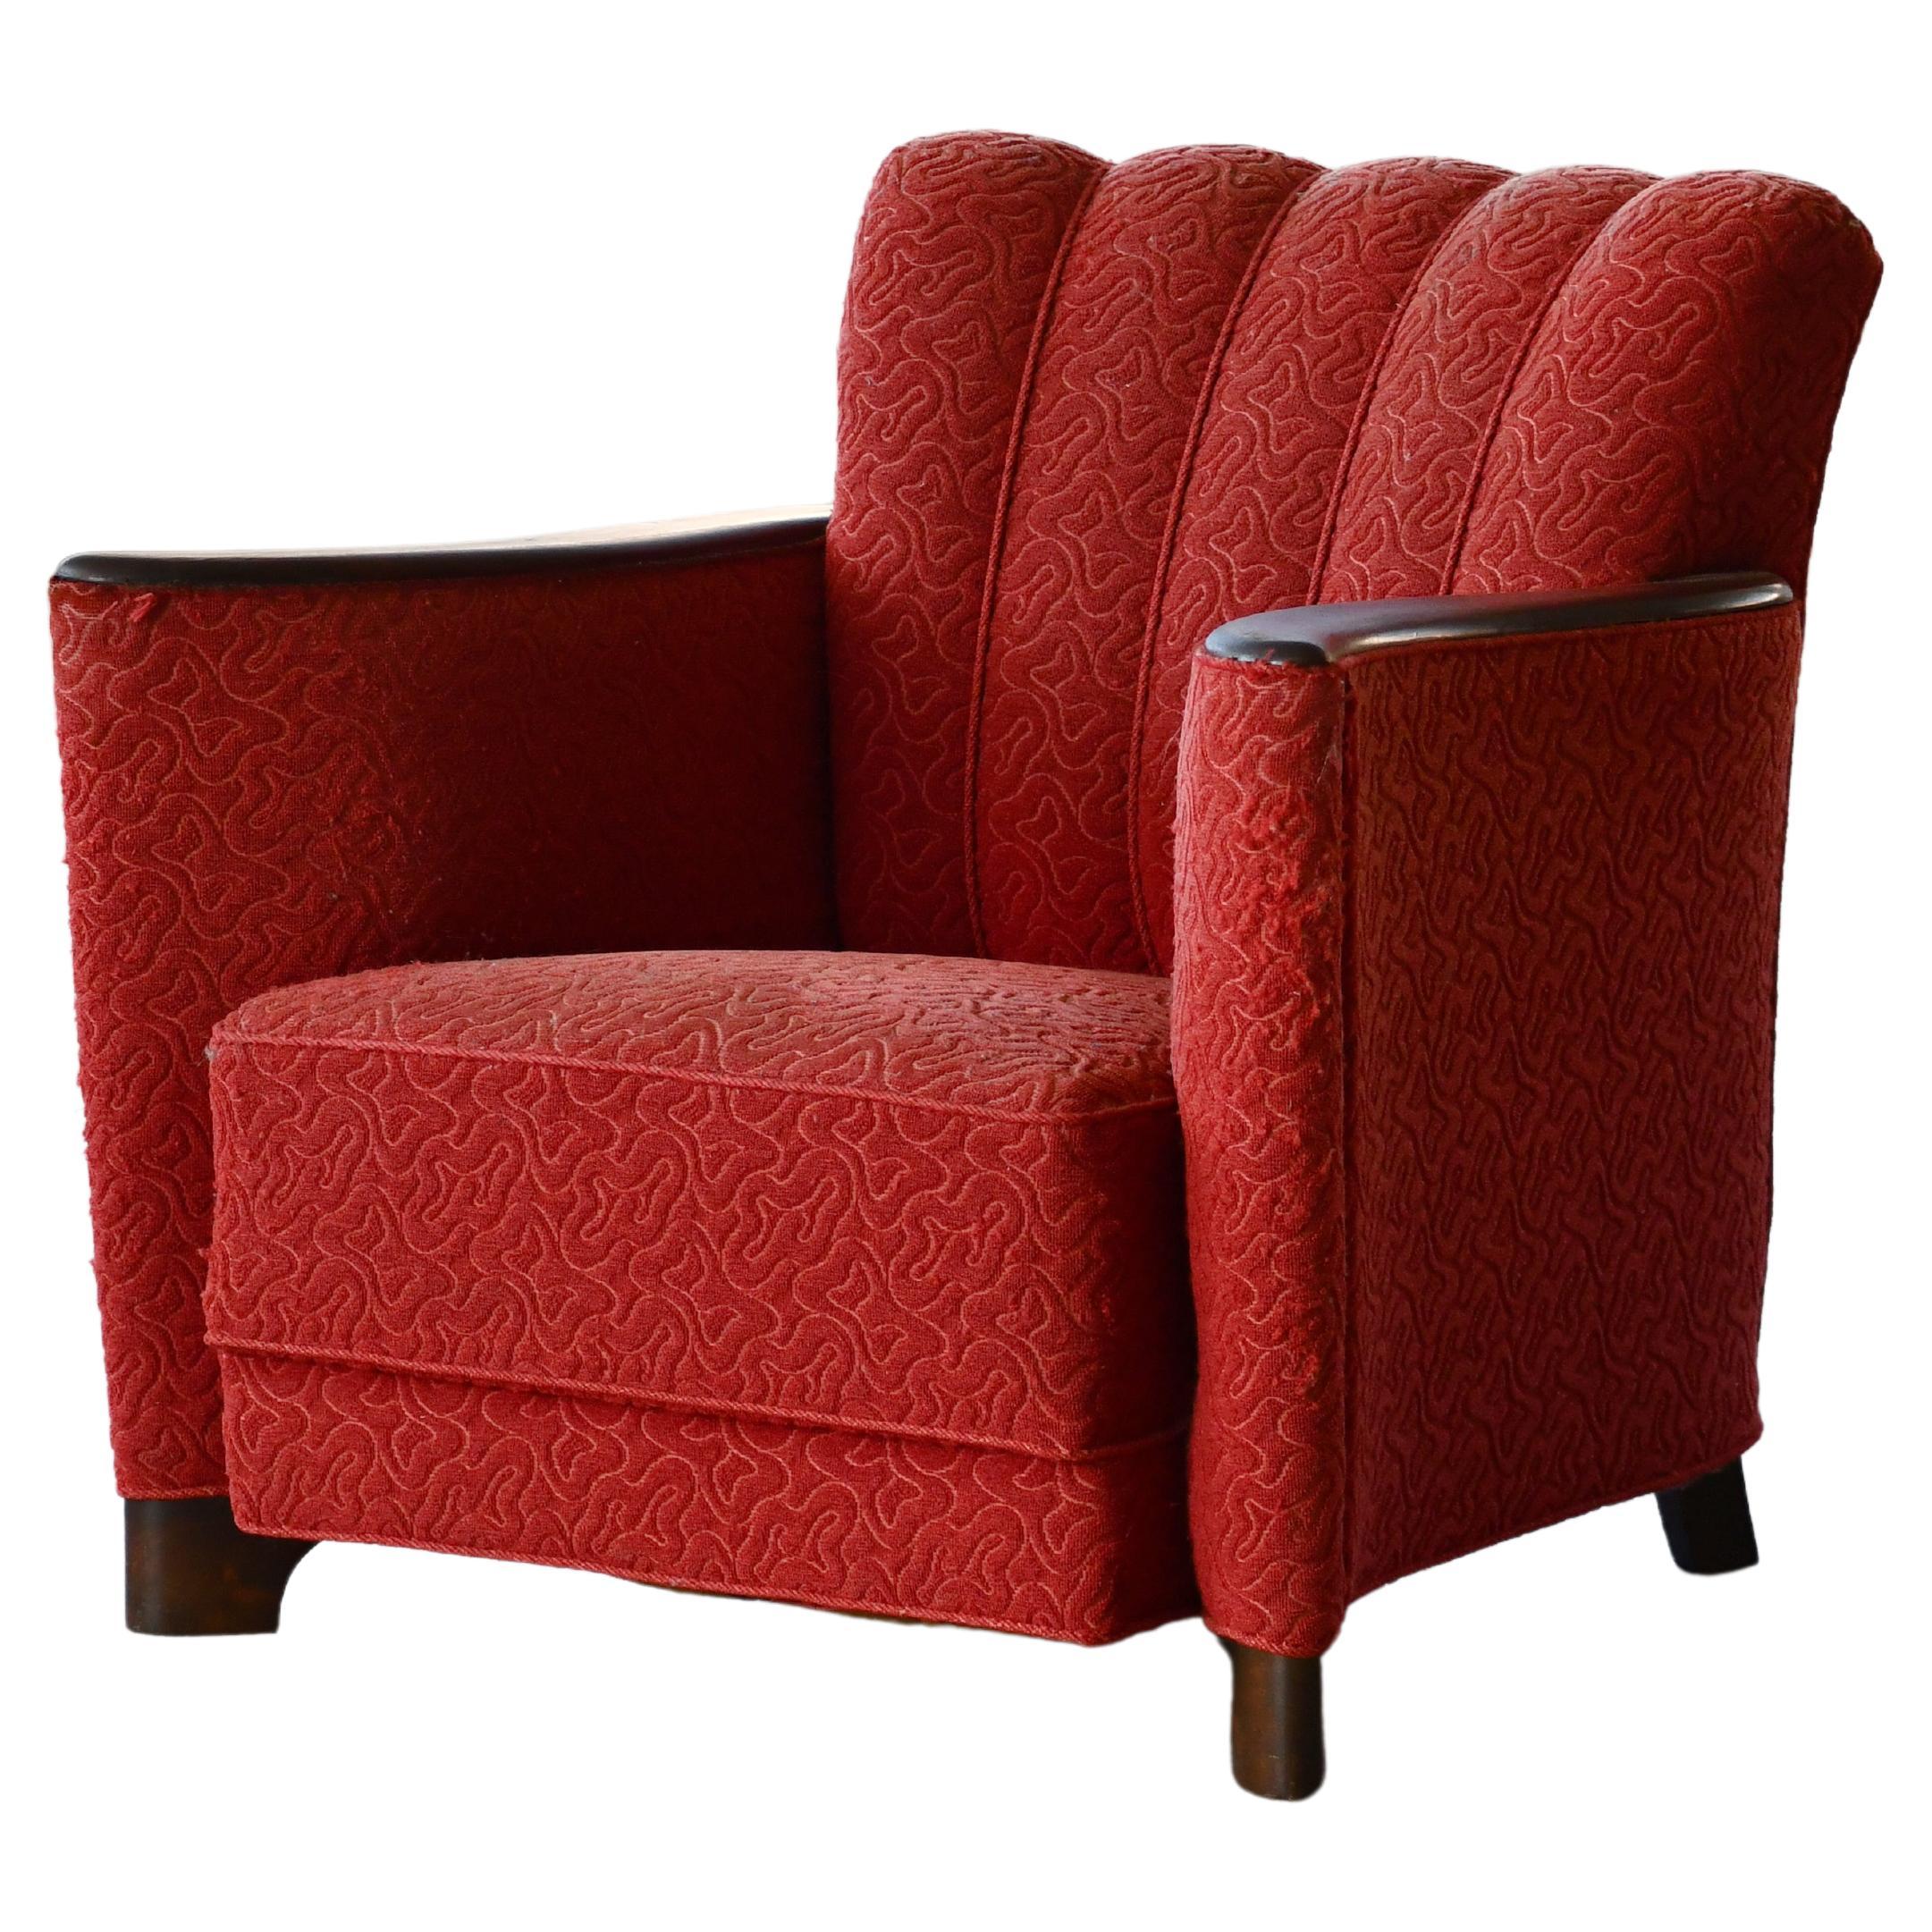 Danish 1930s Art Deco Lounge Chair in Red Mohair with Mahogany Accents For Sale